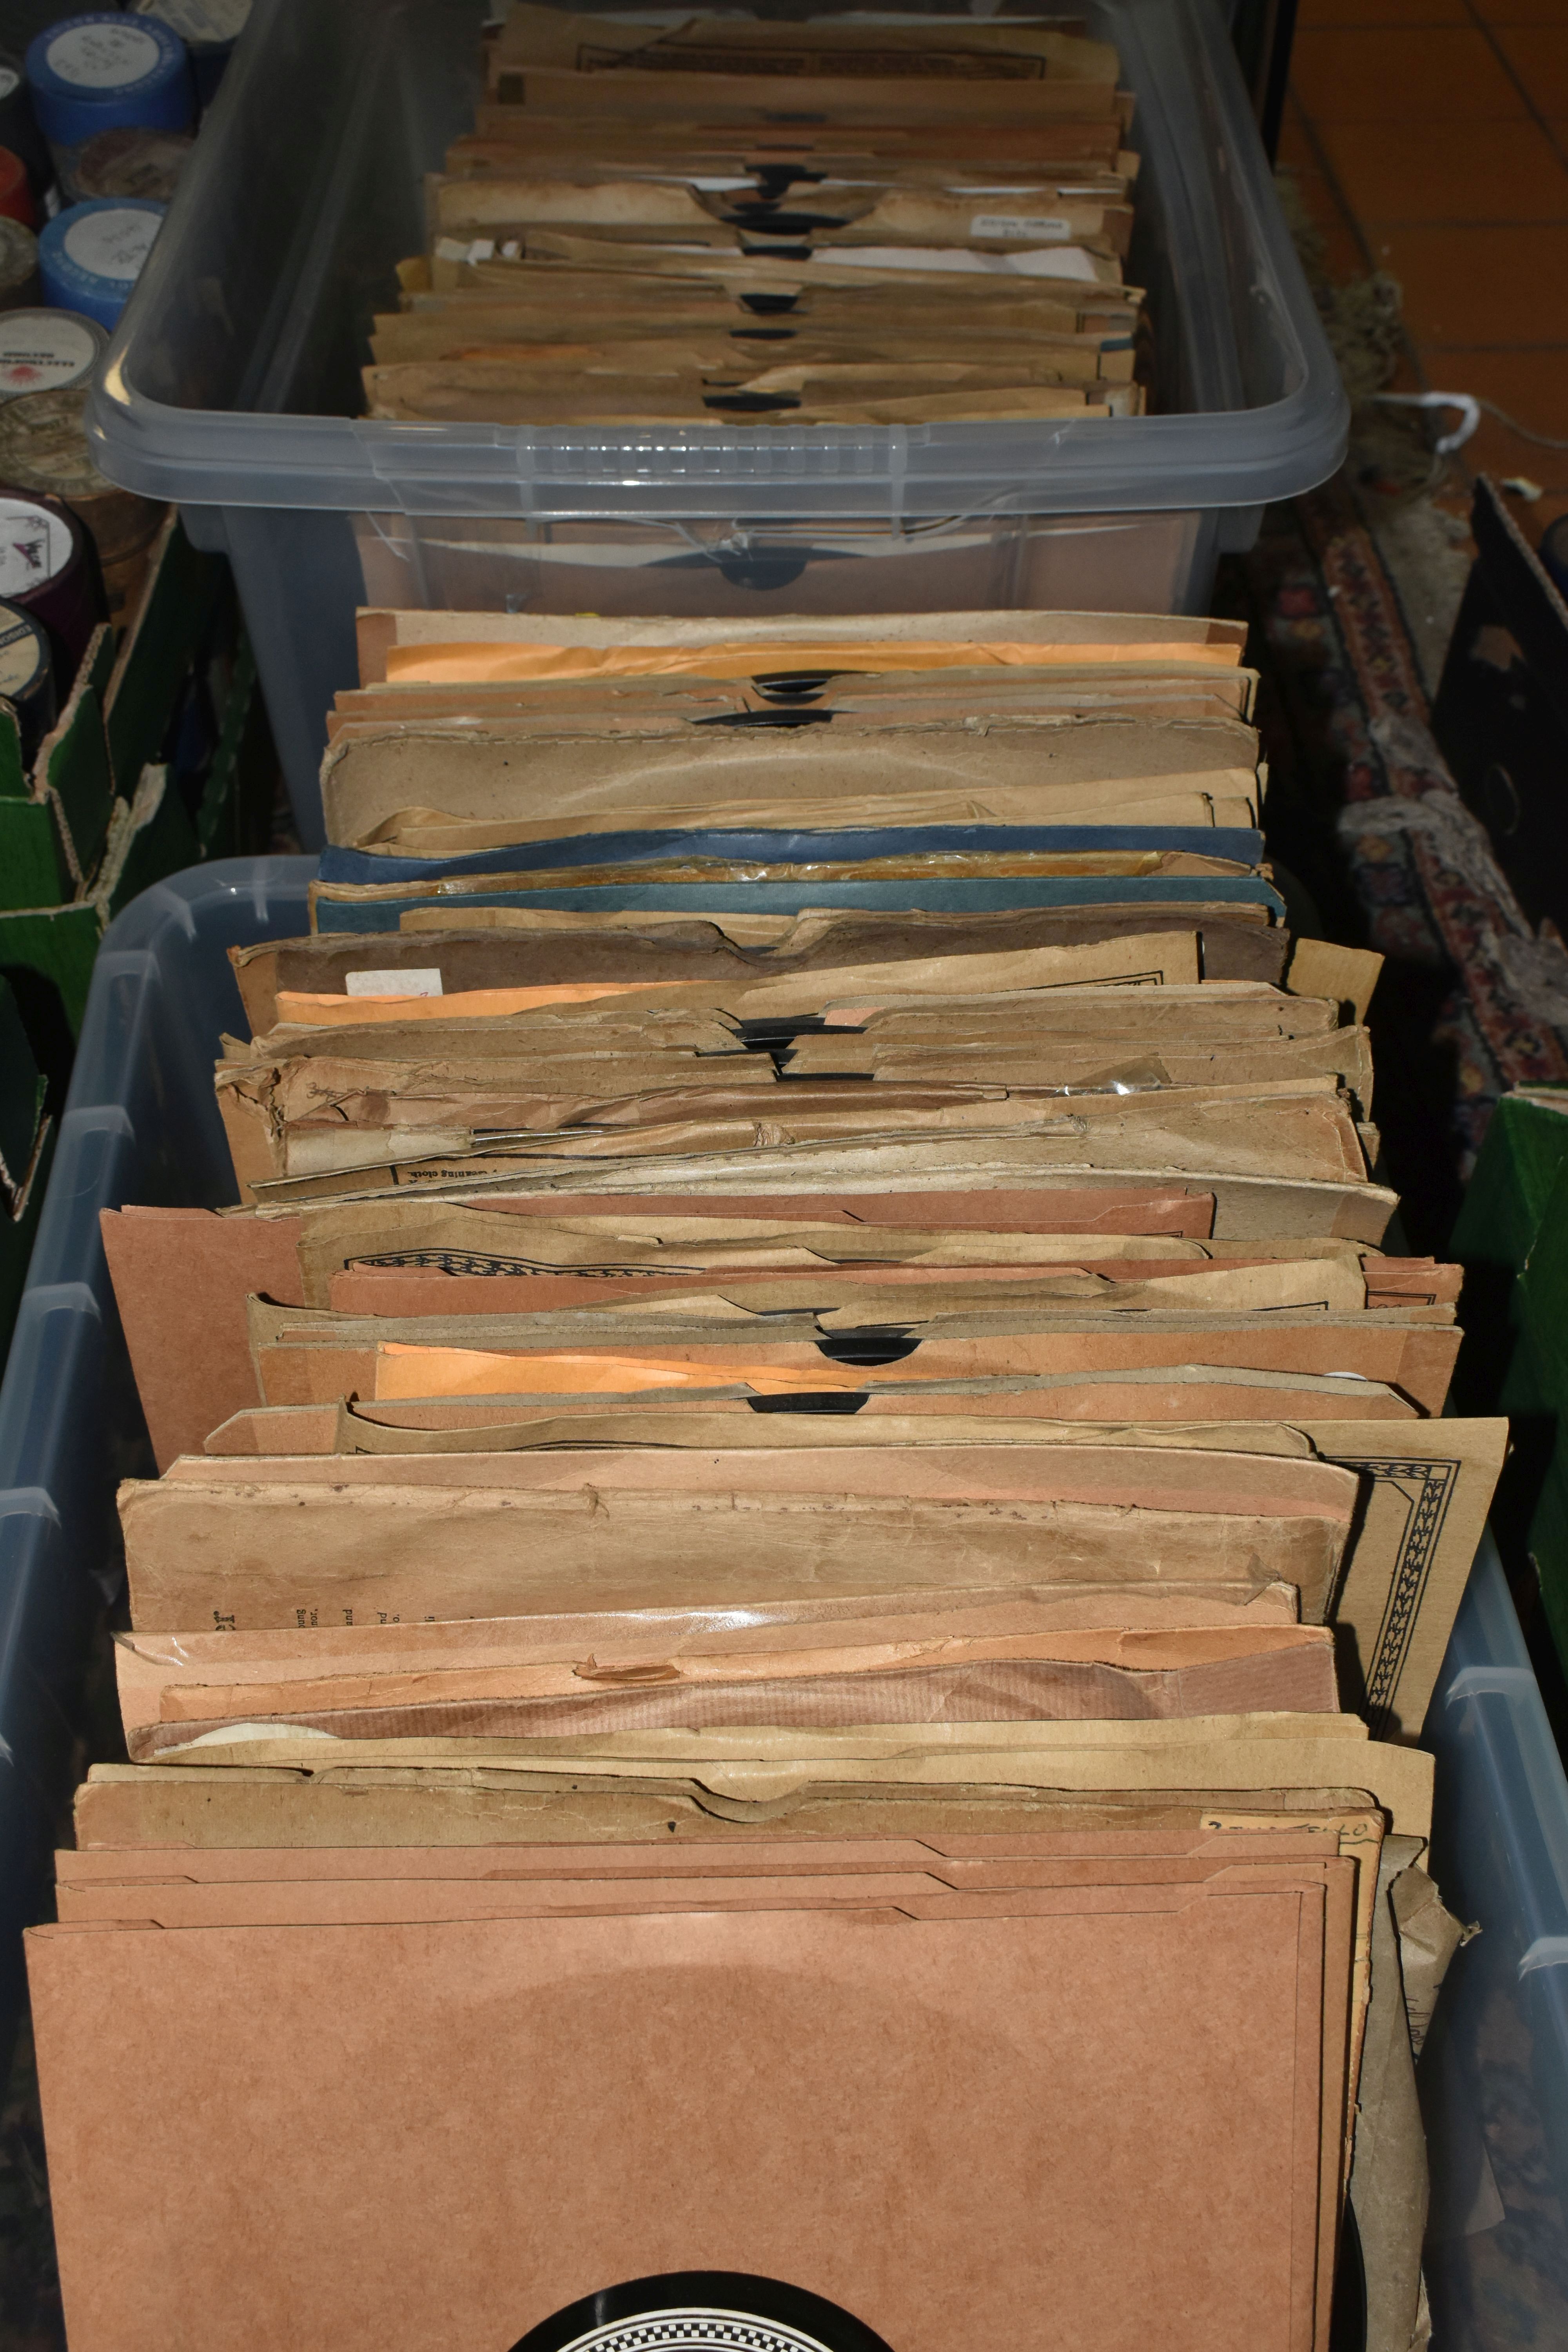 TWO BOXES OF EDISON DISC RECORDS, styles include orchestral, ragtime, music hall etc - Image 2 of 6